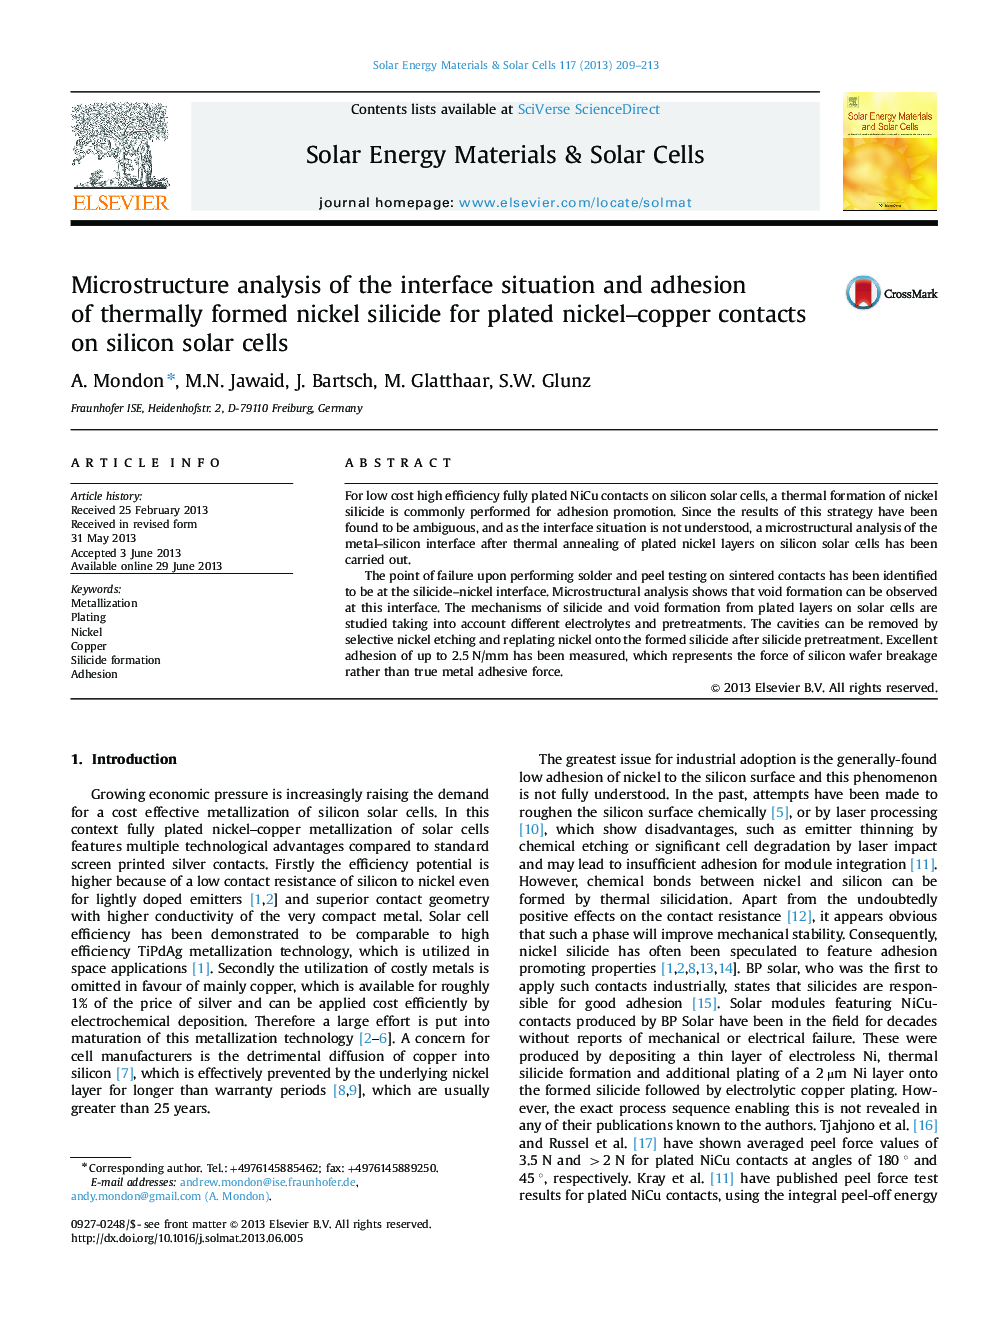 Microstructure analysis of the interface situation and adhesion of thermally formed nickel silicide for plated nickel-copper contacts on silicon solar cells